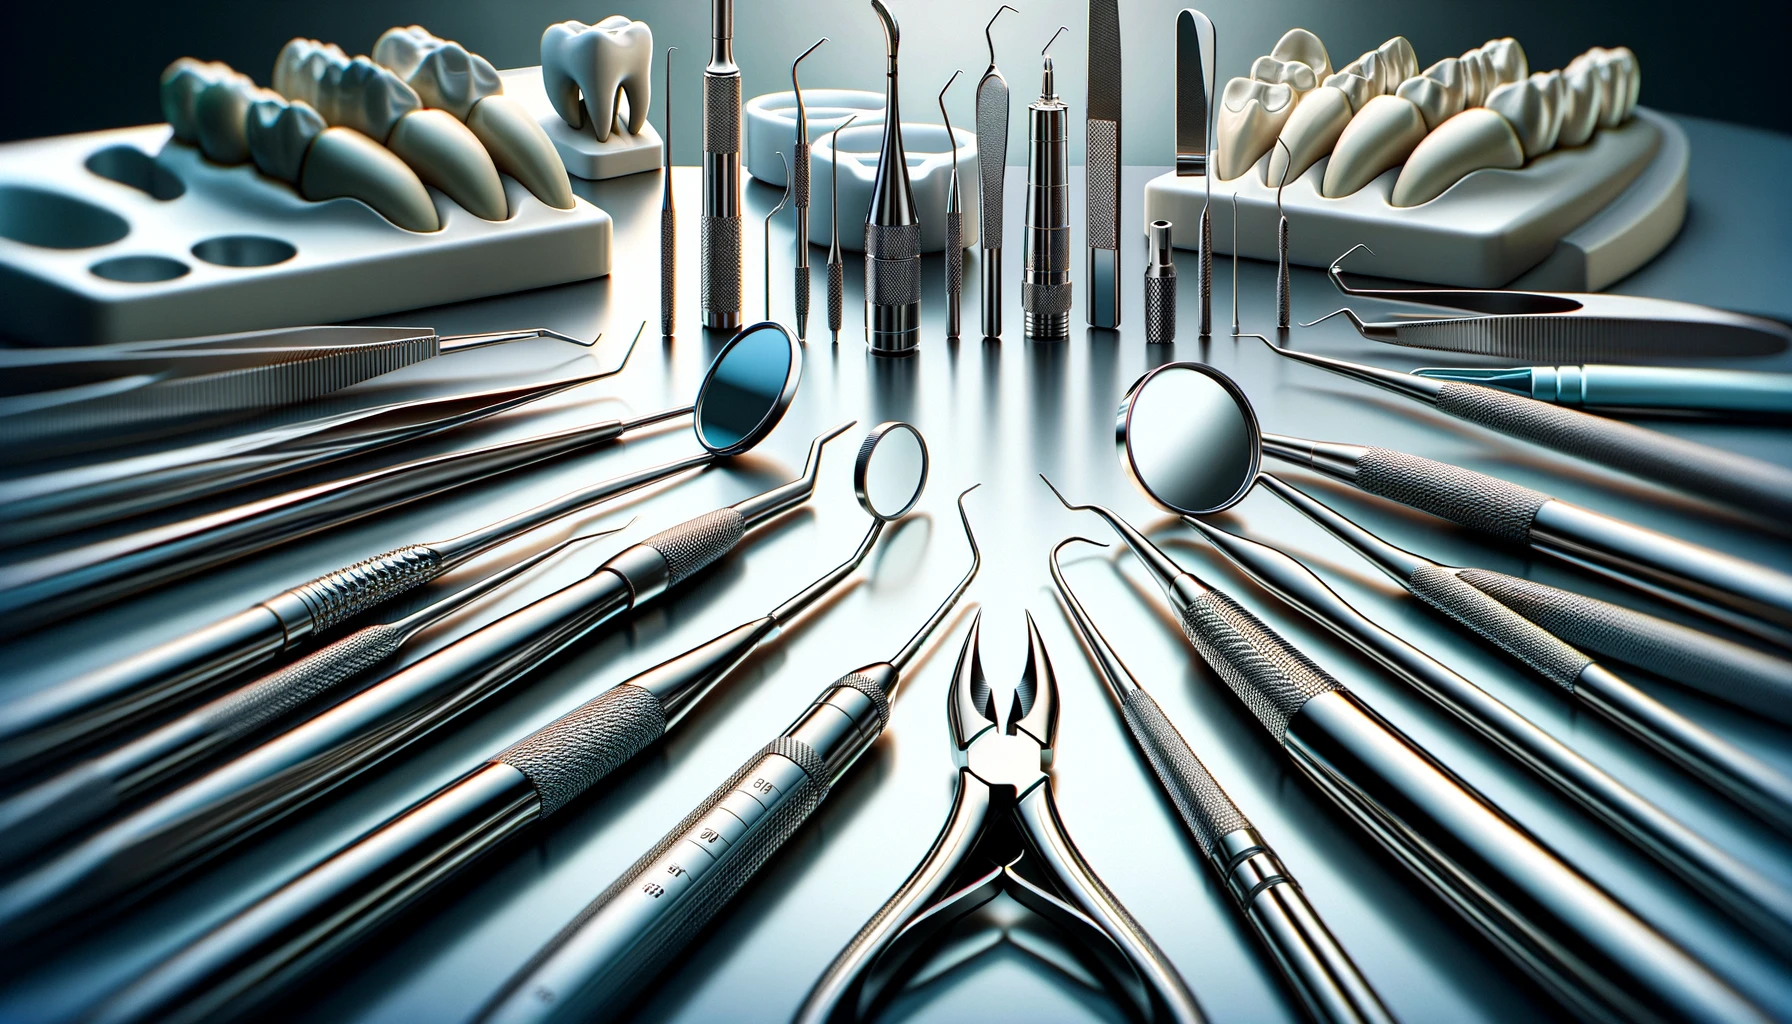 Criteria for Selecting High-Quality Dental Instruments